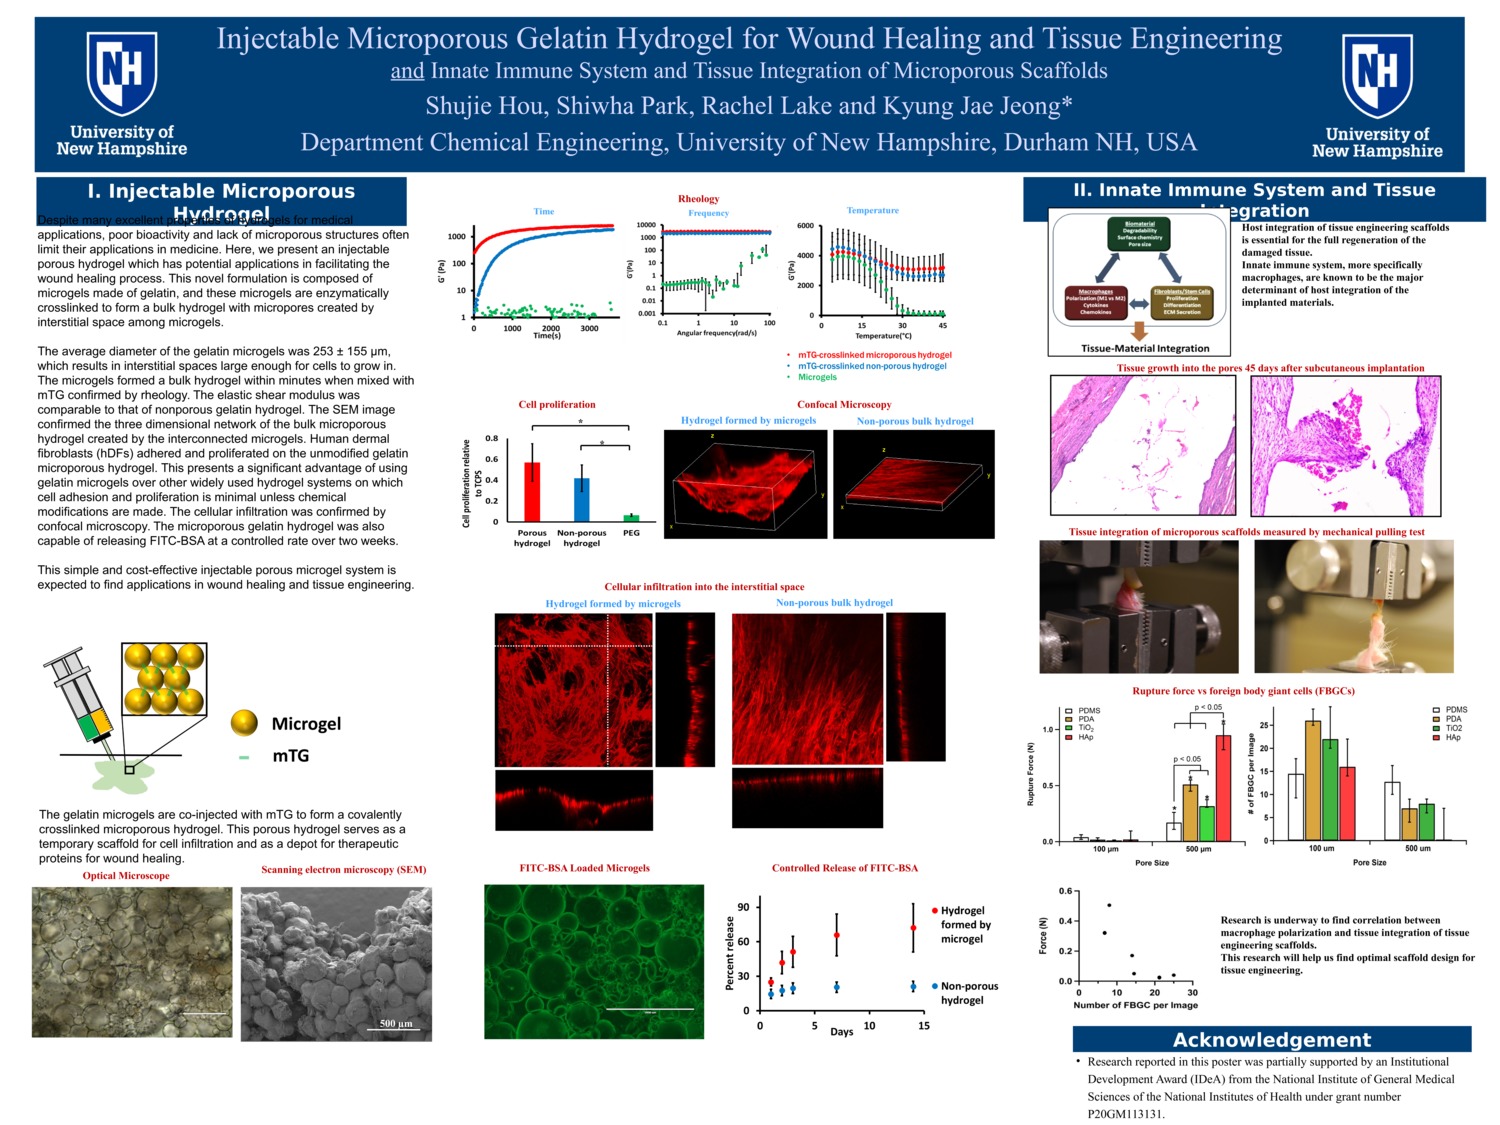 Injectable Microporous Gelatin Hydrogel For Wound Healing And Tissue Engineering by spark